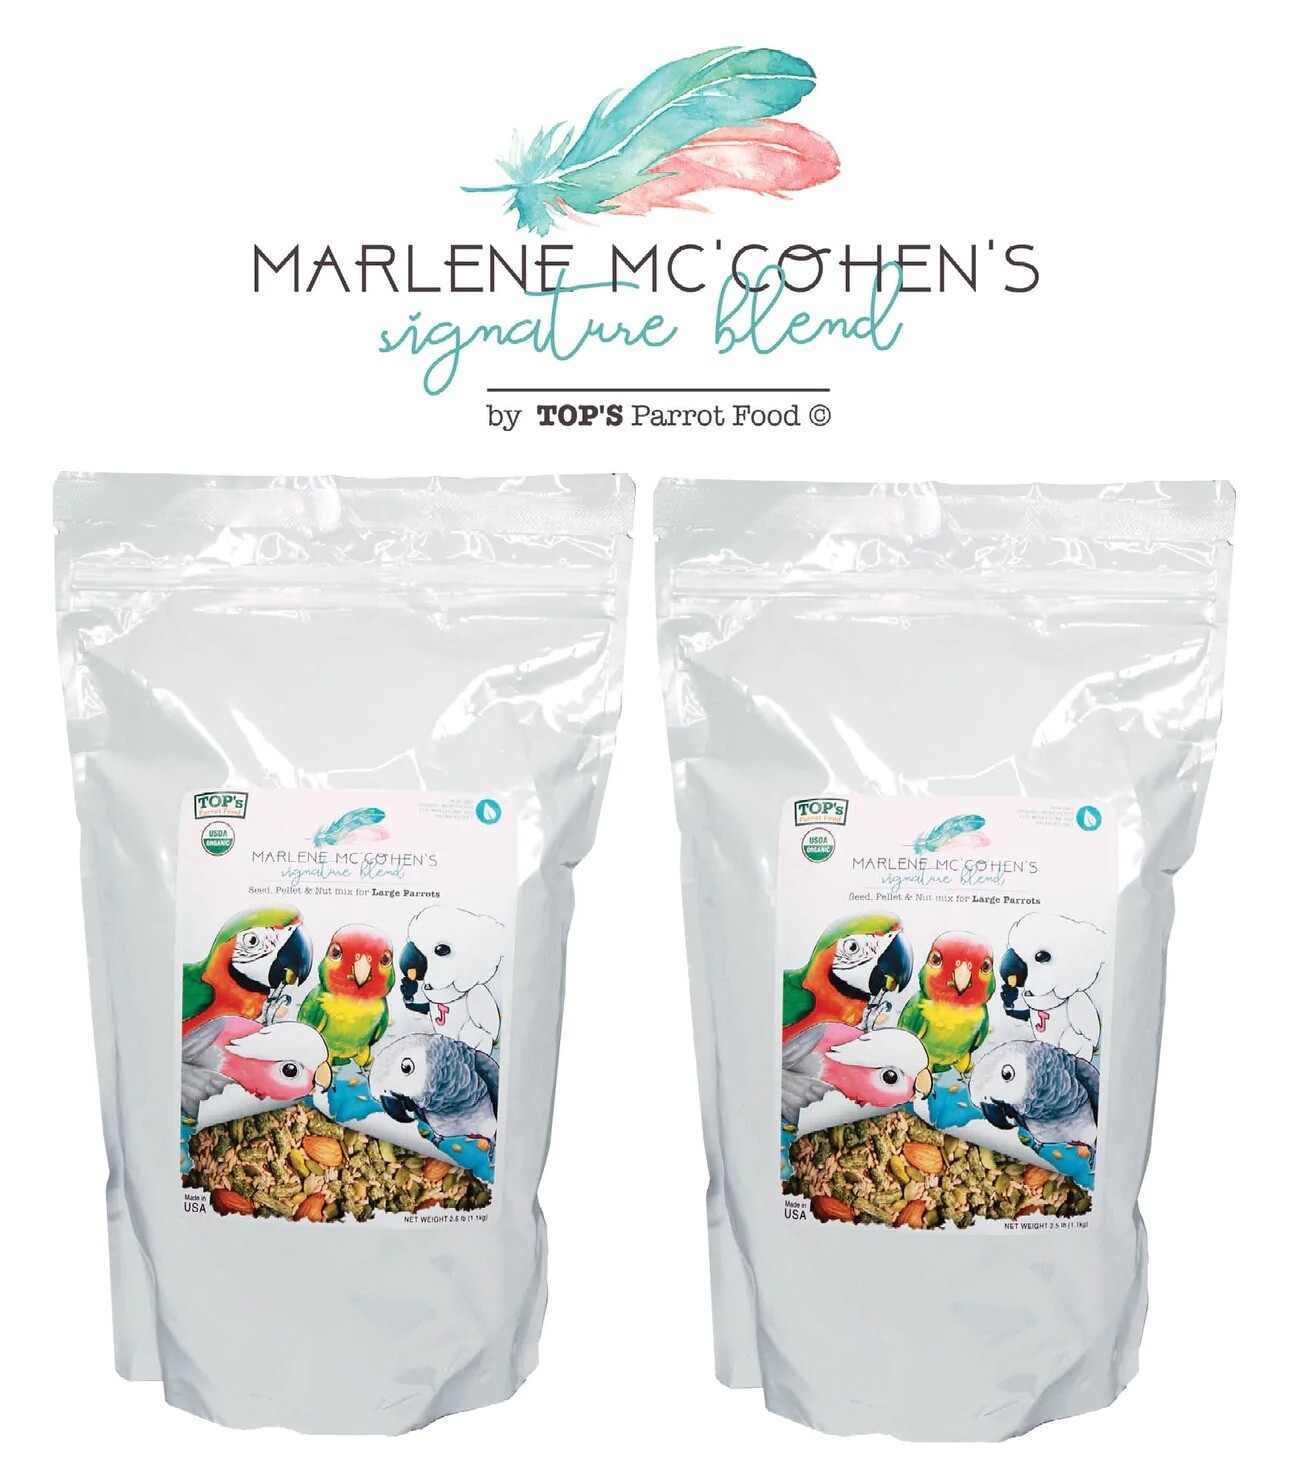 2 Pack Marlene Mc'Cohen's Signature Blend by TOPs Parrot Food - Mix of TOPs pellets, seed mixes and nuts for Large Birds 5 Lbs total